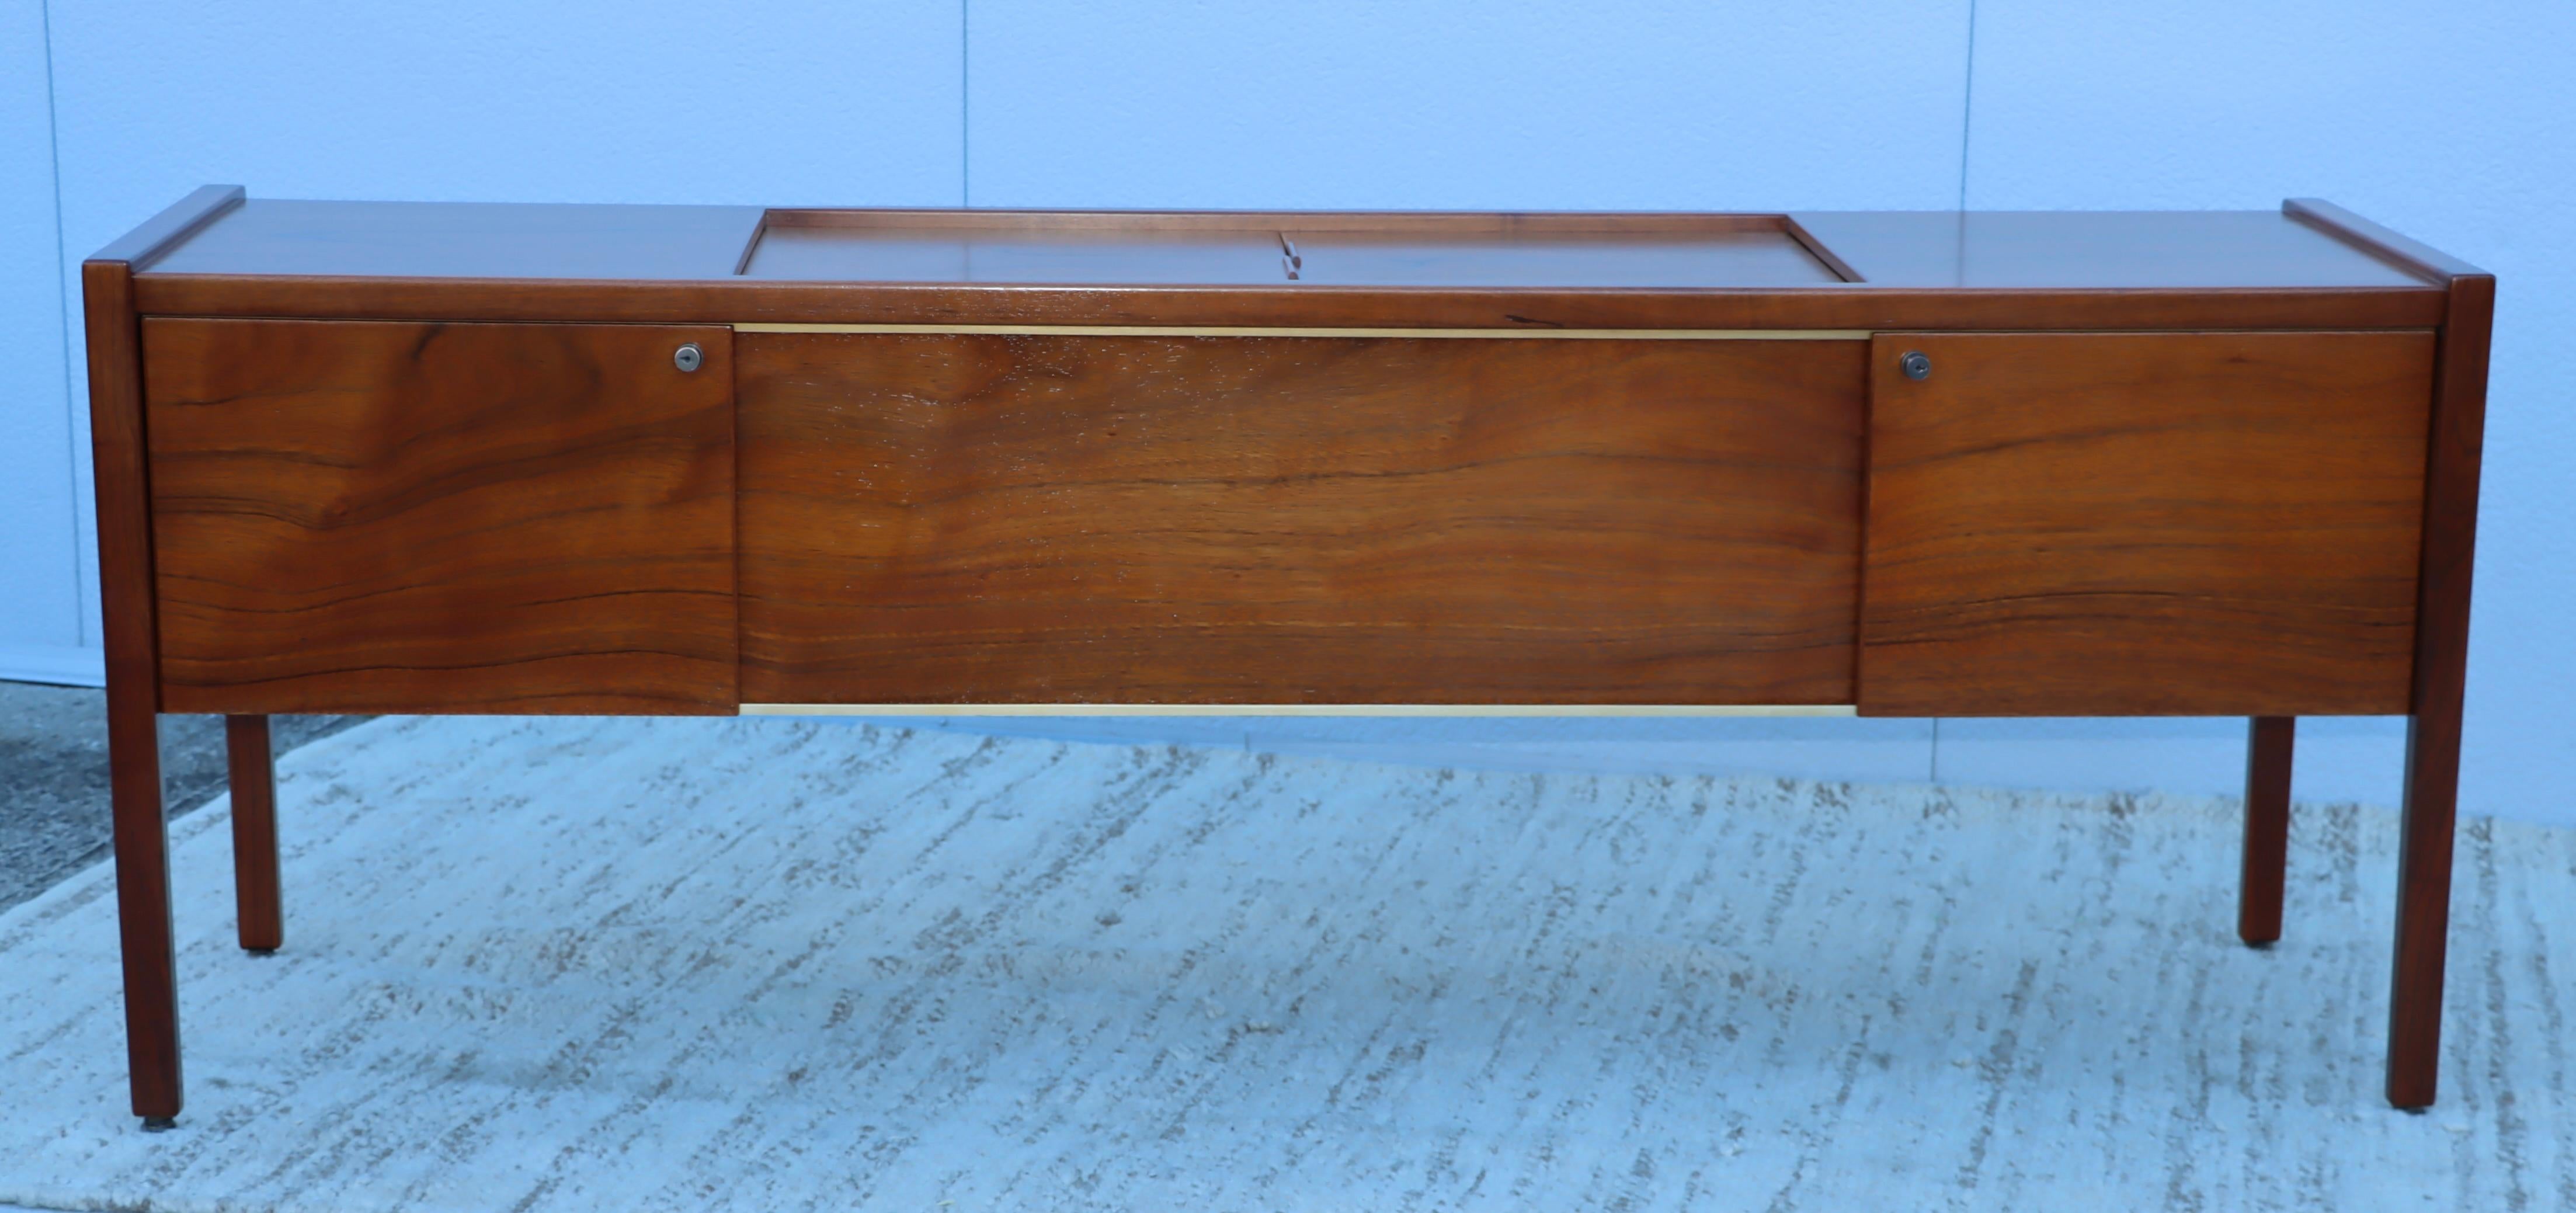 Rare 1970s Mid-Century Modern paldao wood file cabinet designed by Jens Risom, fully restored with minor wear and patina due to age and use.